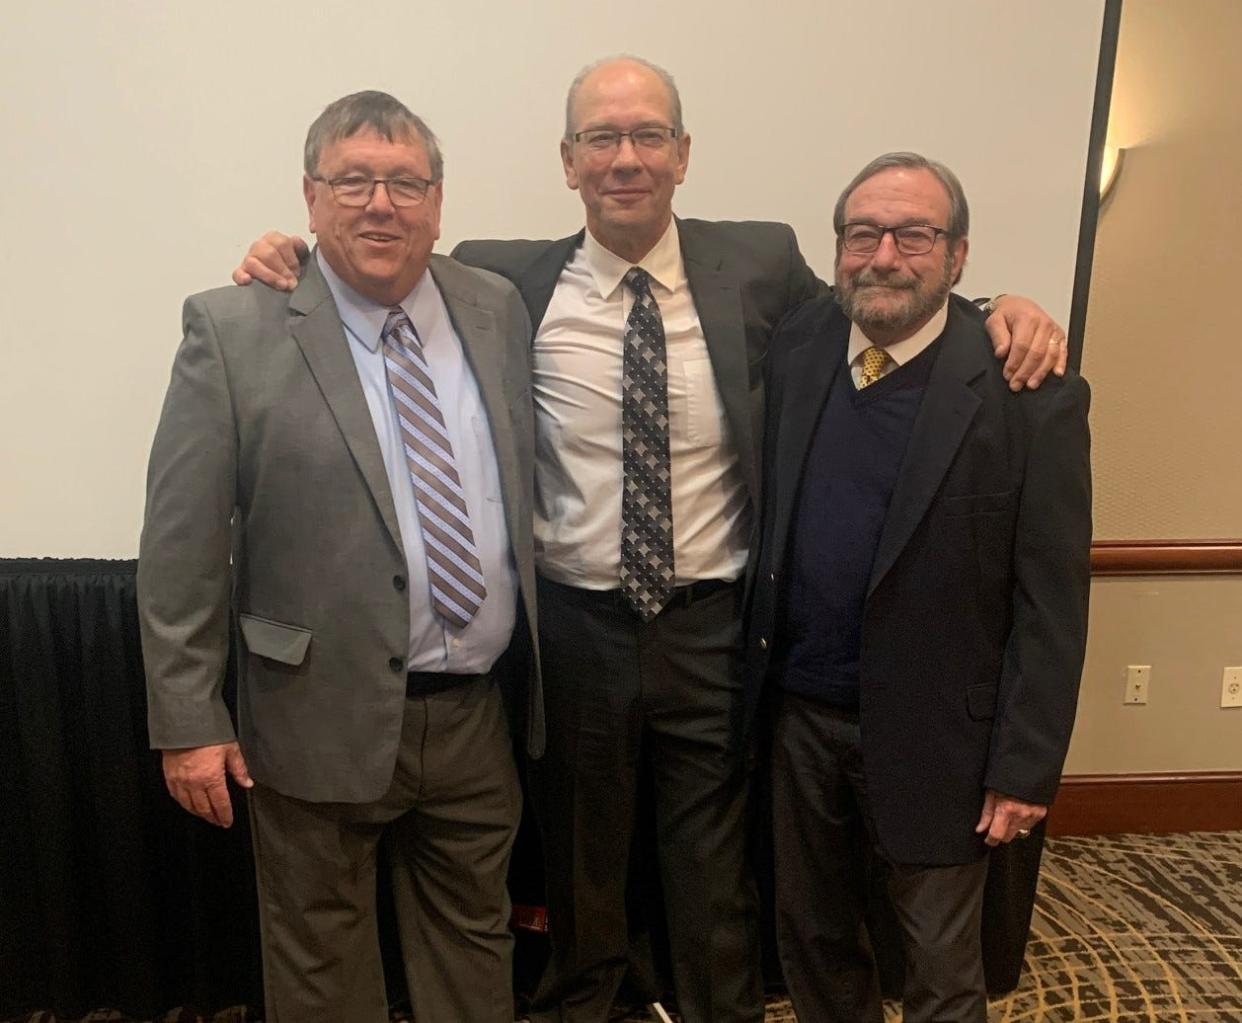 Former Battle Creek Central football coaches Doug Bess, left, and Dick Bush, right received the prestigious Jim Crowley Award at the annual Michigan High School Football Coaches Association Clinic. They were each presented the award by former BCC coach Al Slamer, middle.